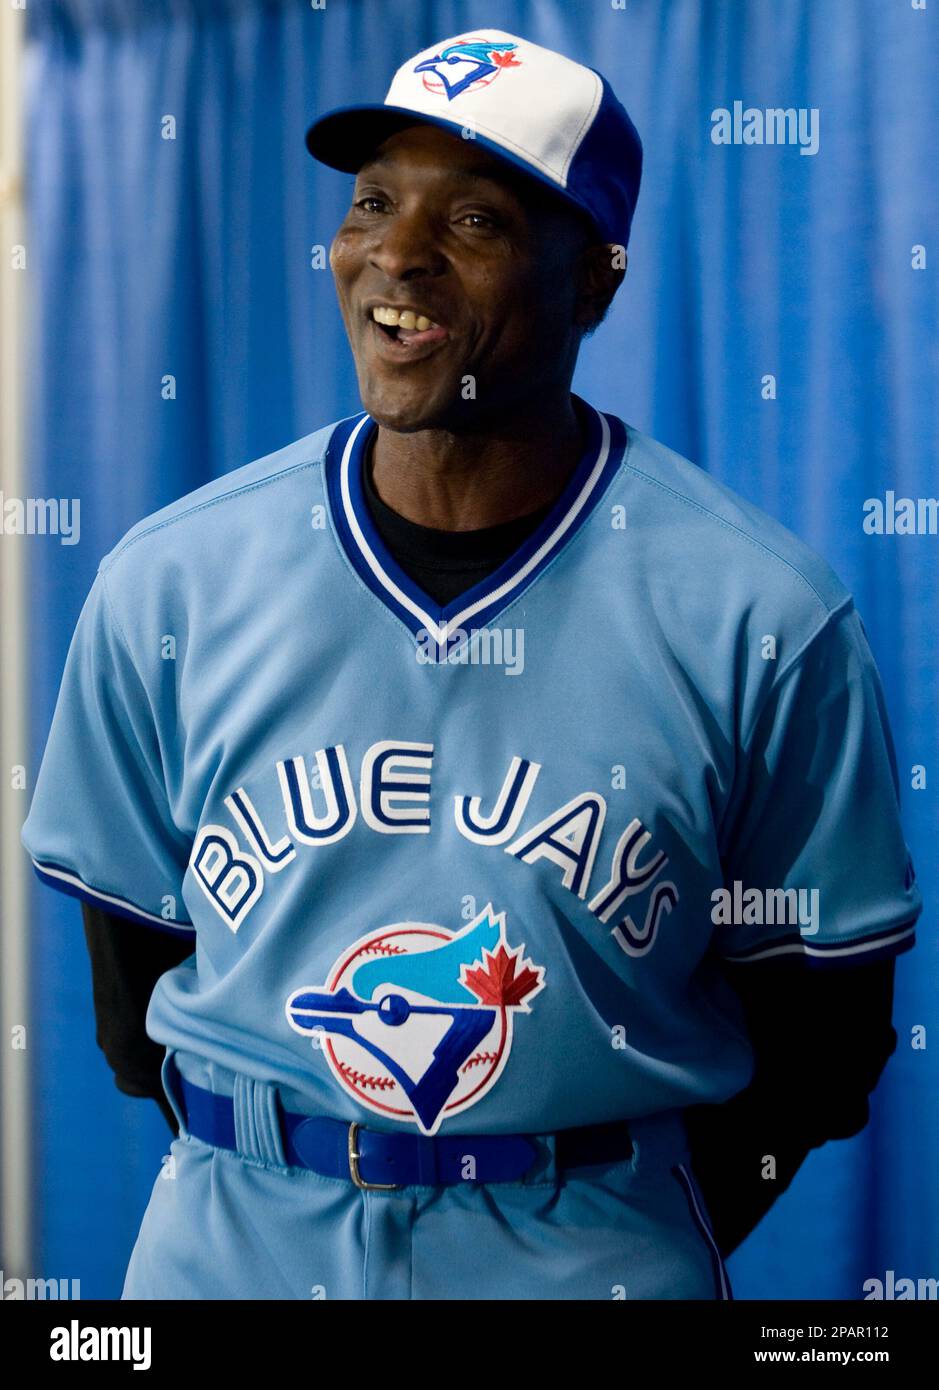 Former Toronto Blue Jays player Lloyd Moseby smiles as he models the team's  new uniform during a uniform launch in Toronto, Monday, Dec. 3, 2007. The  vintage powder blue uniforms will be